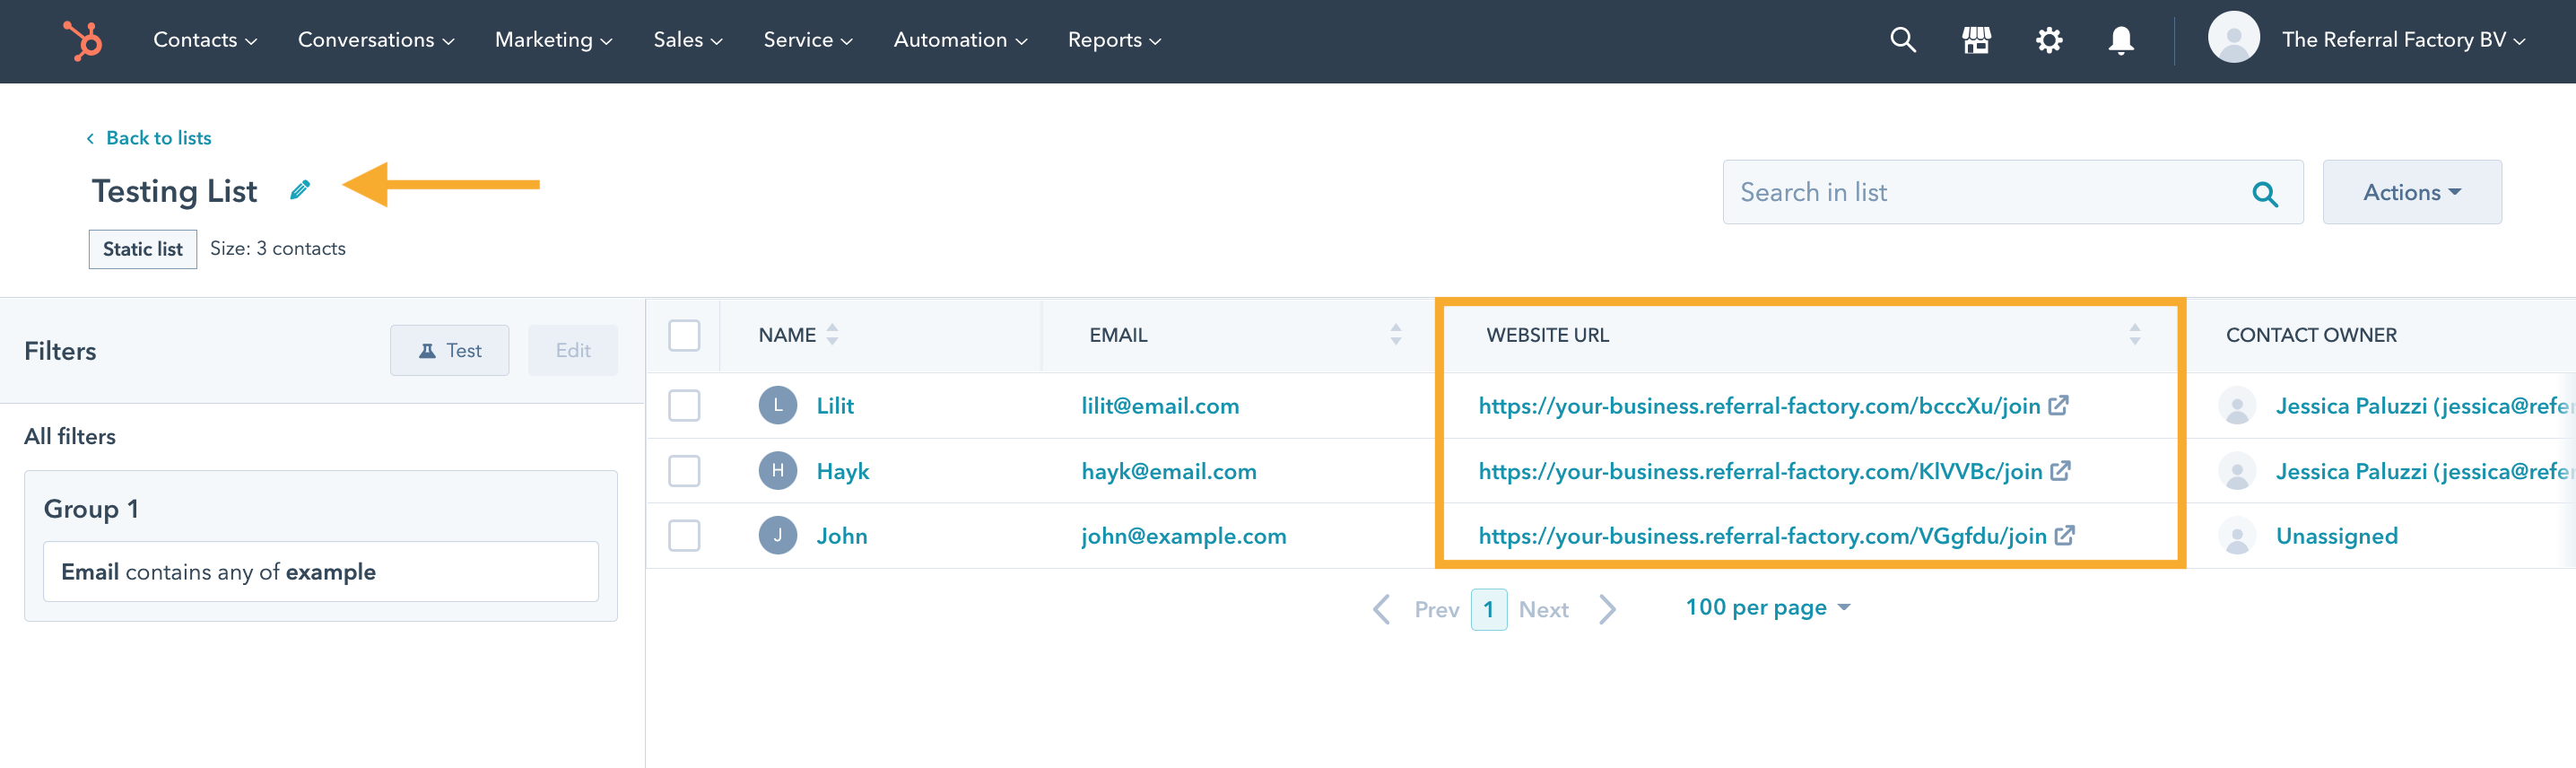 sync_referral_links_CRM_hubspot